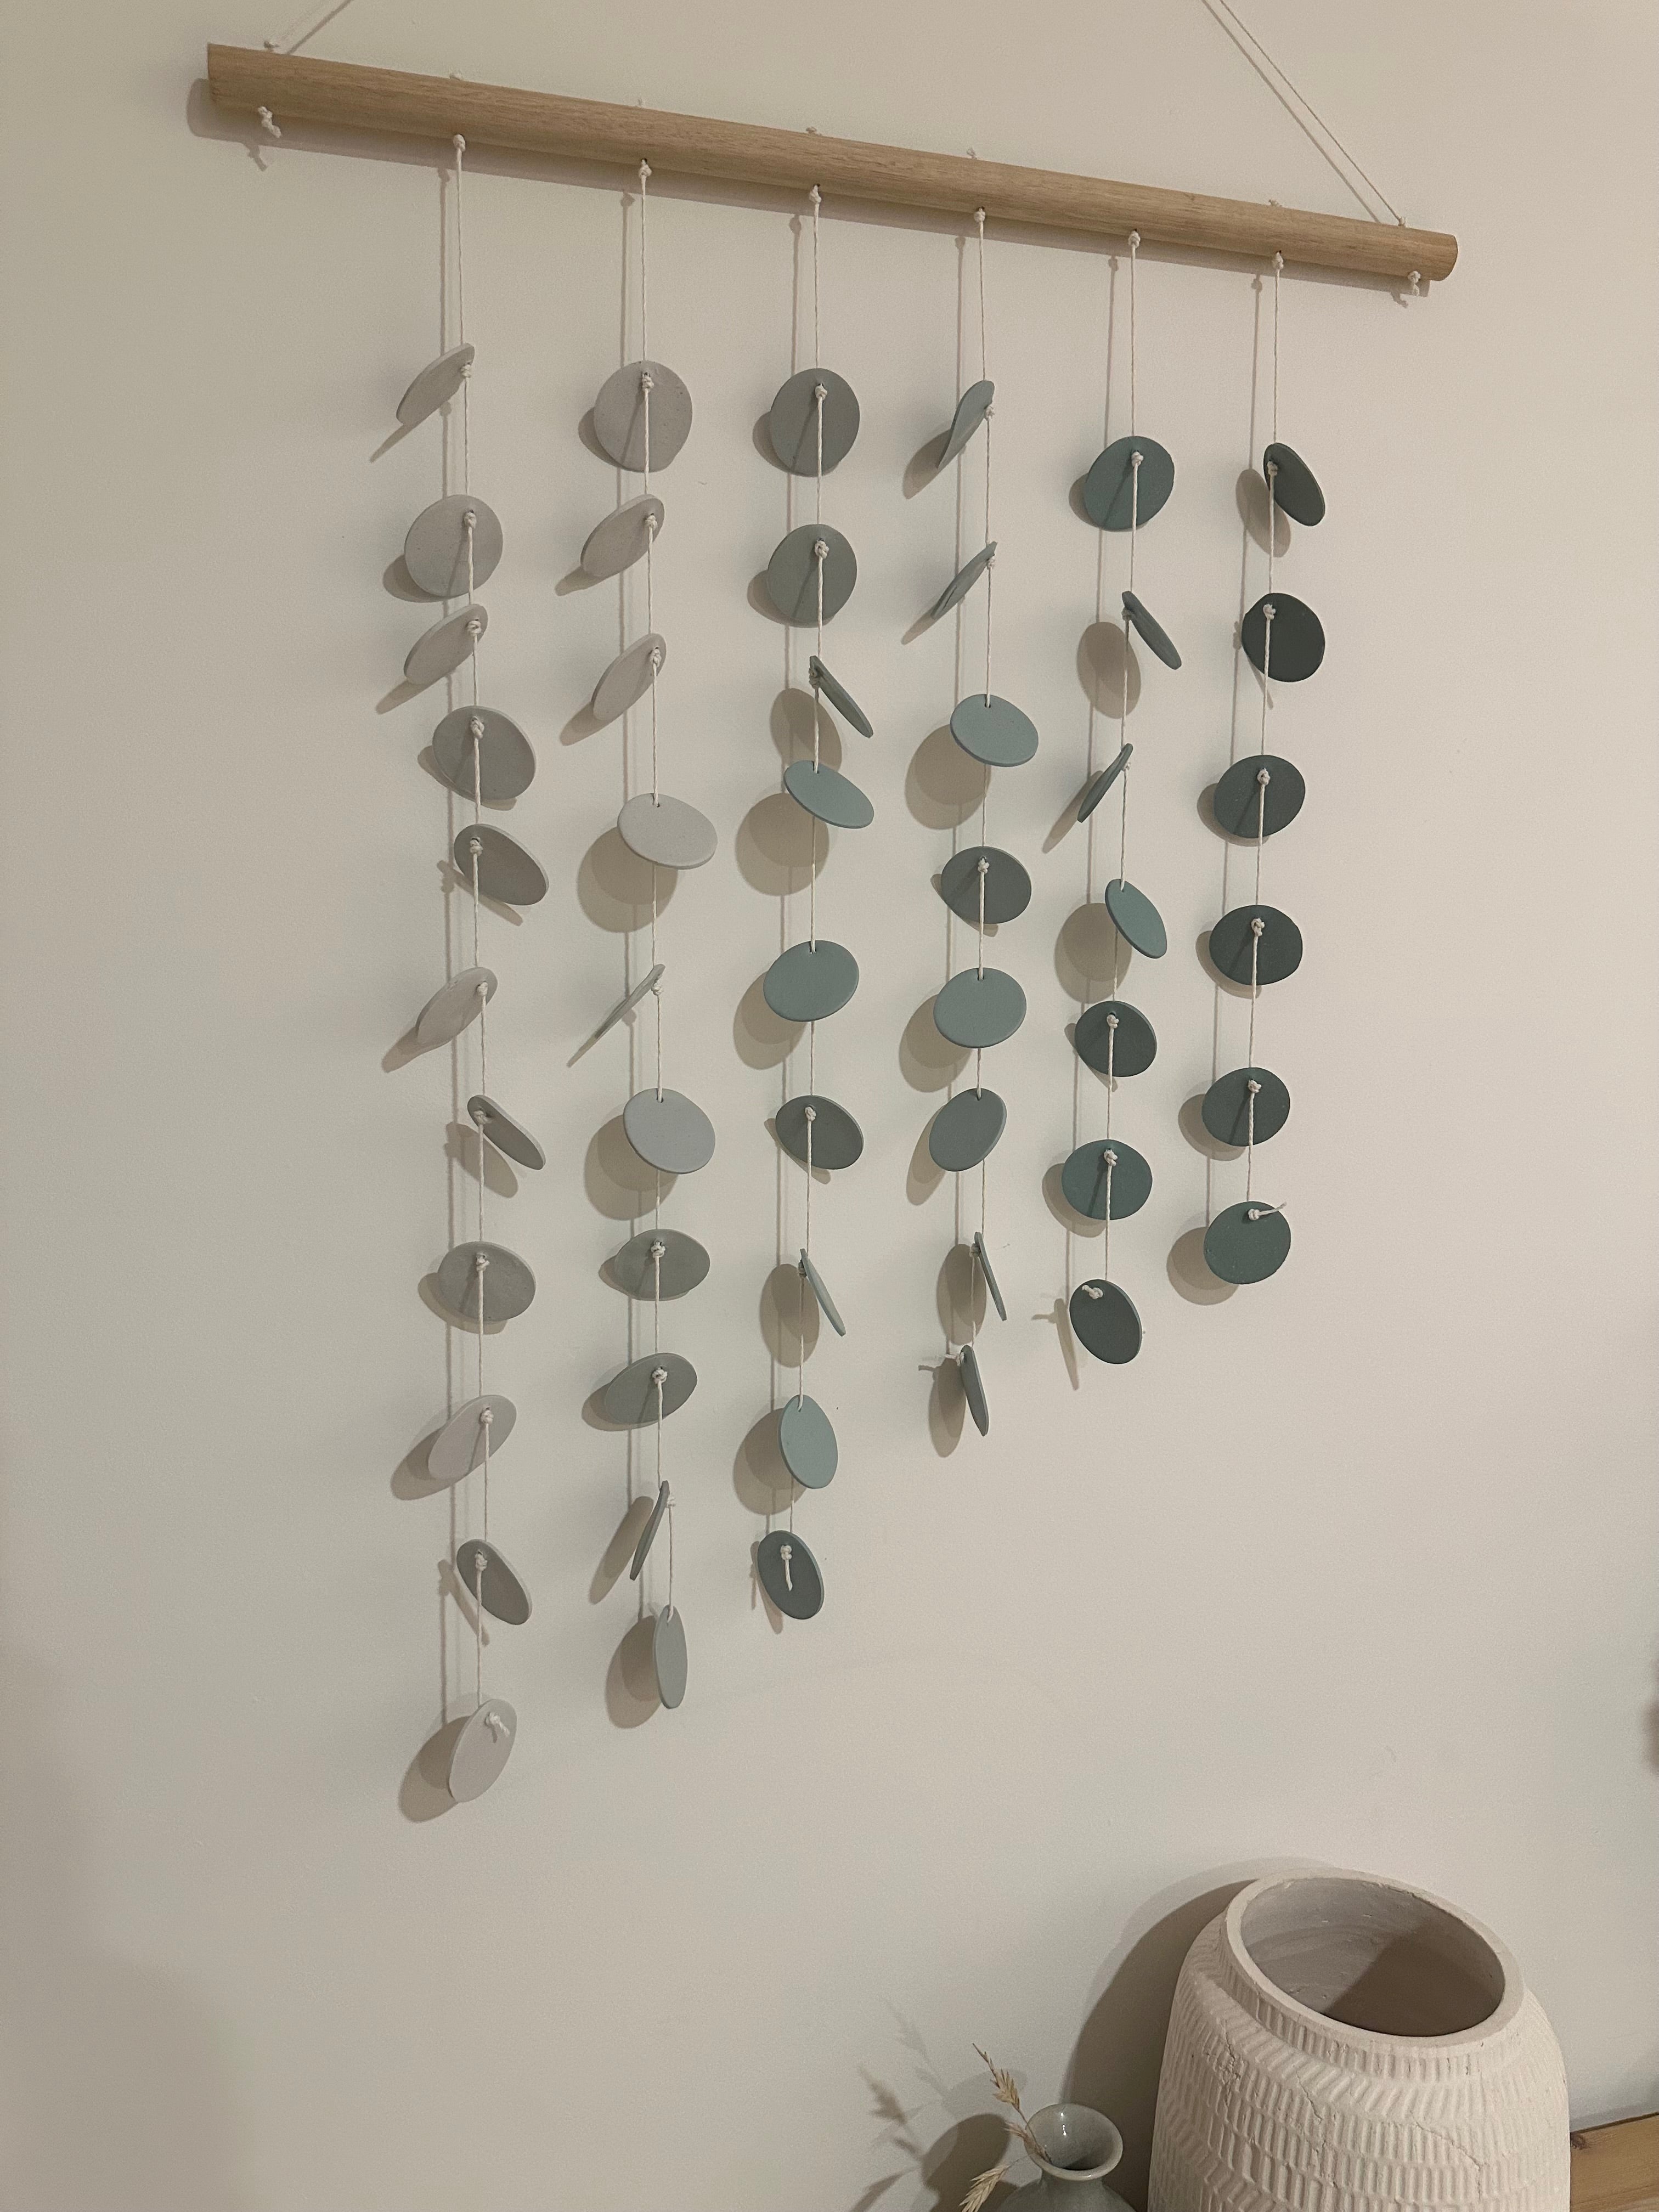 Calm Chaos - Handcrafted Clay Wall Art